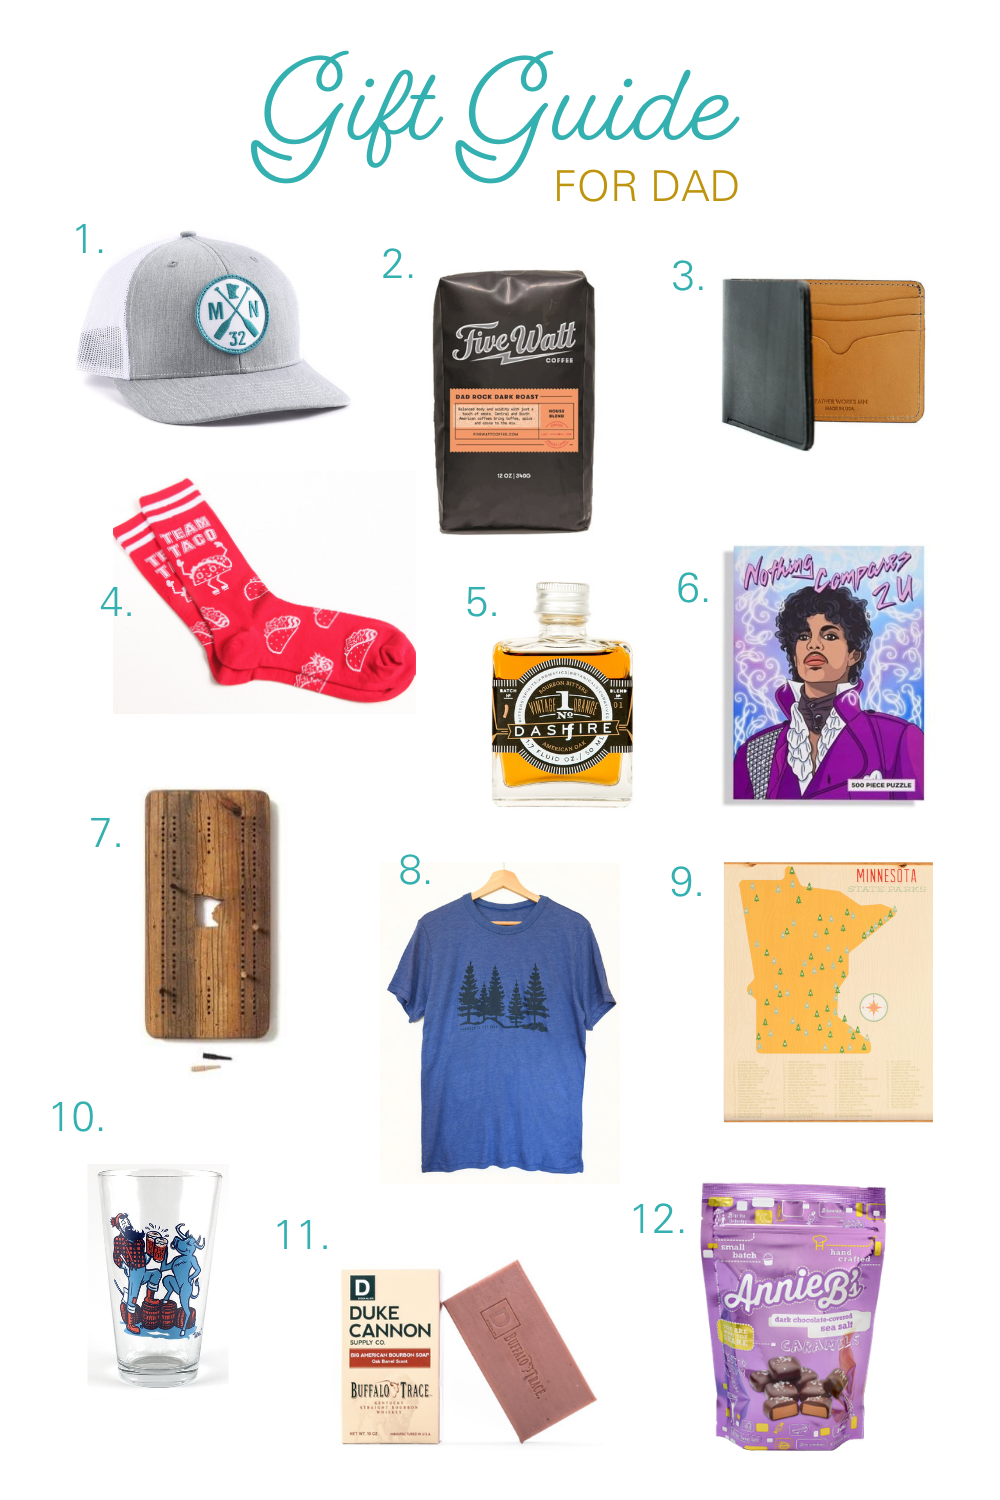 Gift Guide for dad